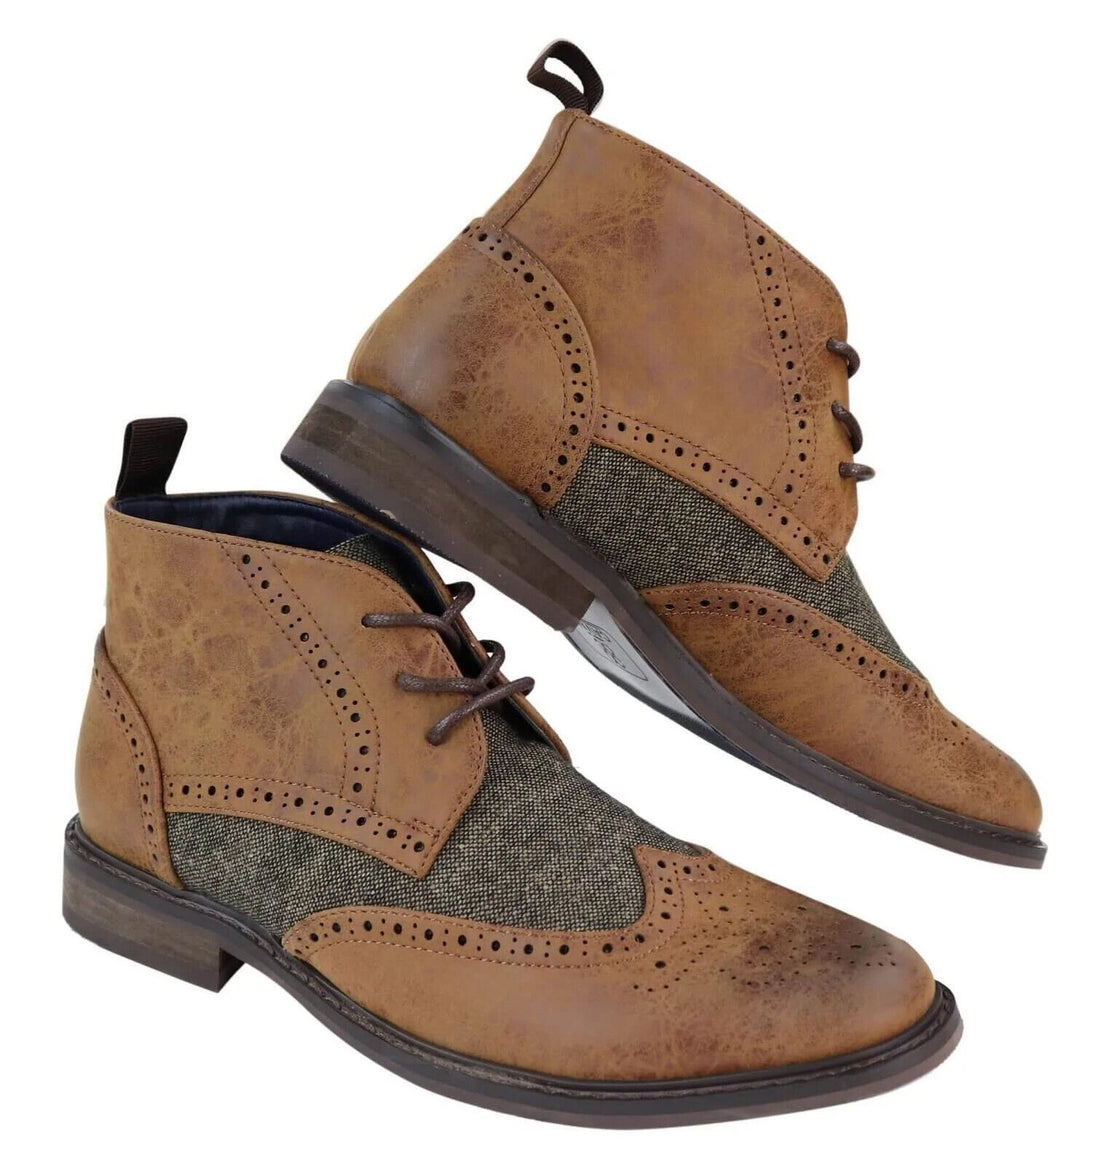 Mens Classic Tweed Oxford Brogue Ankle Boots in Tan Leather - Upperclass Fashions 